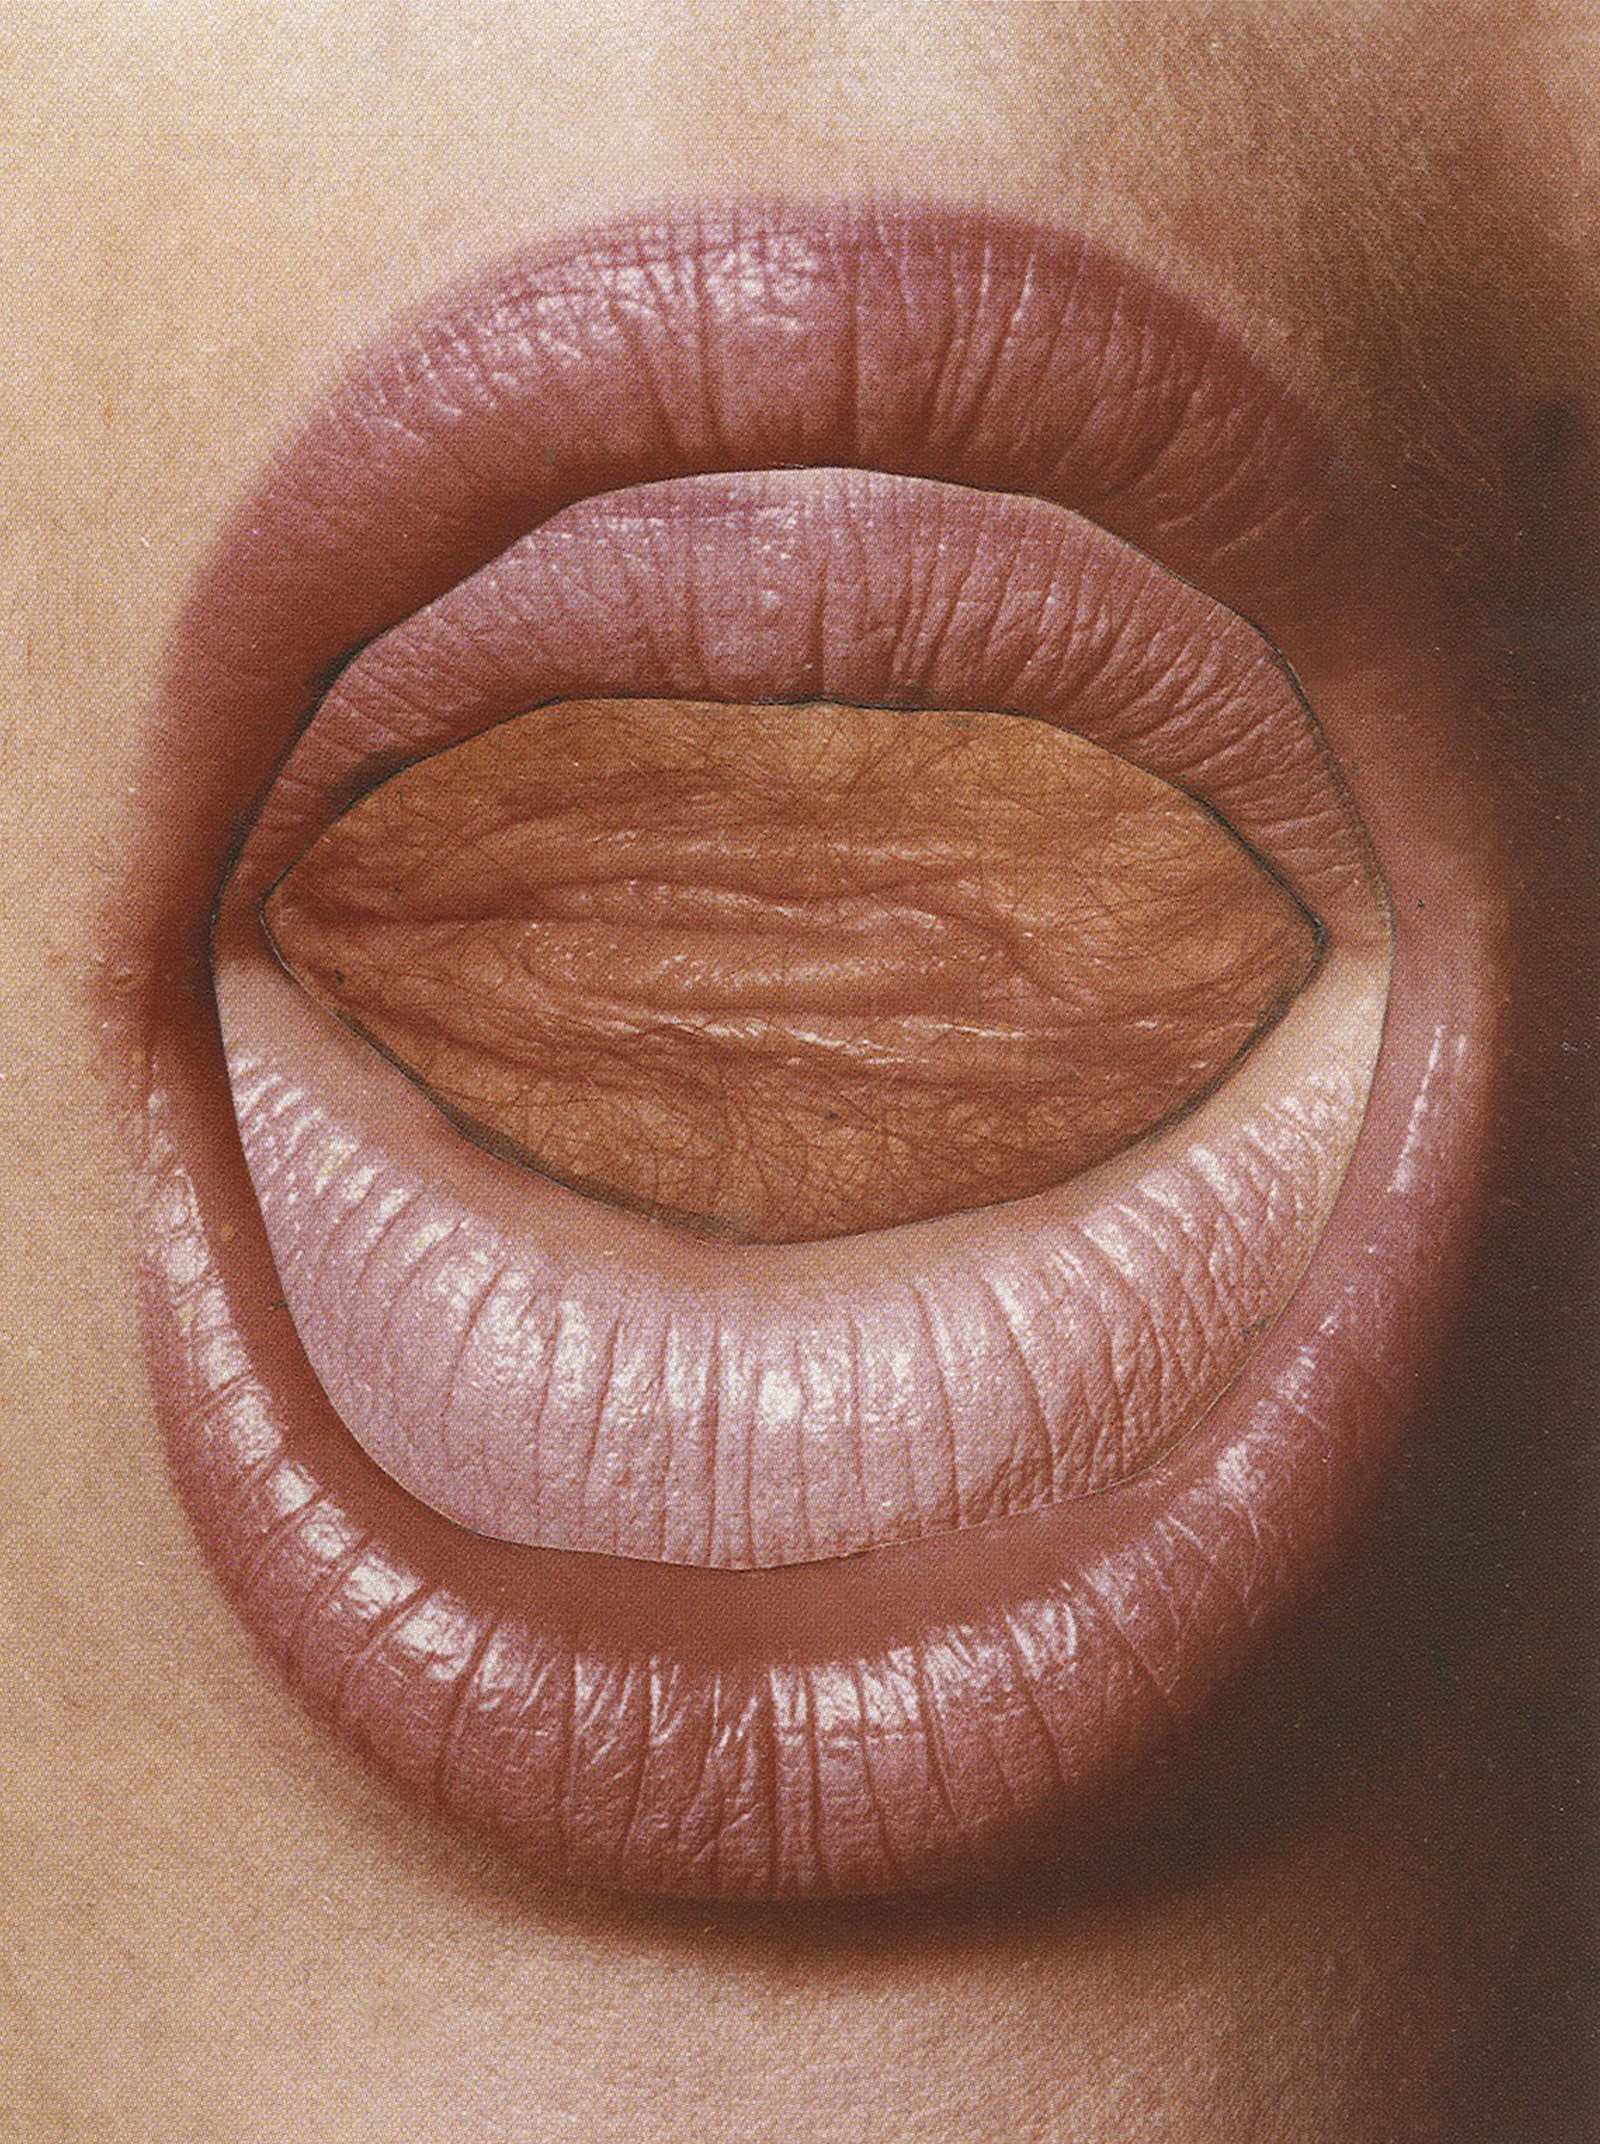 Read My Lips_1973_Penrose collection